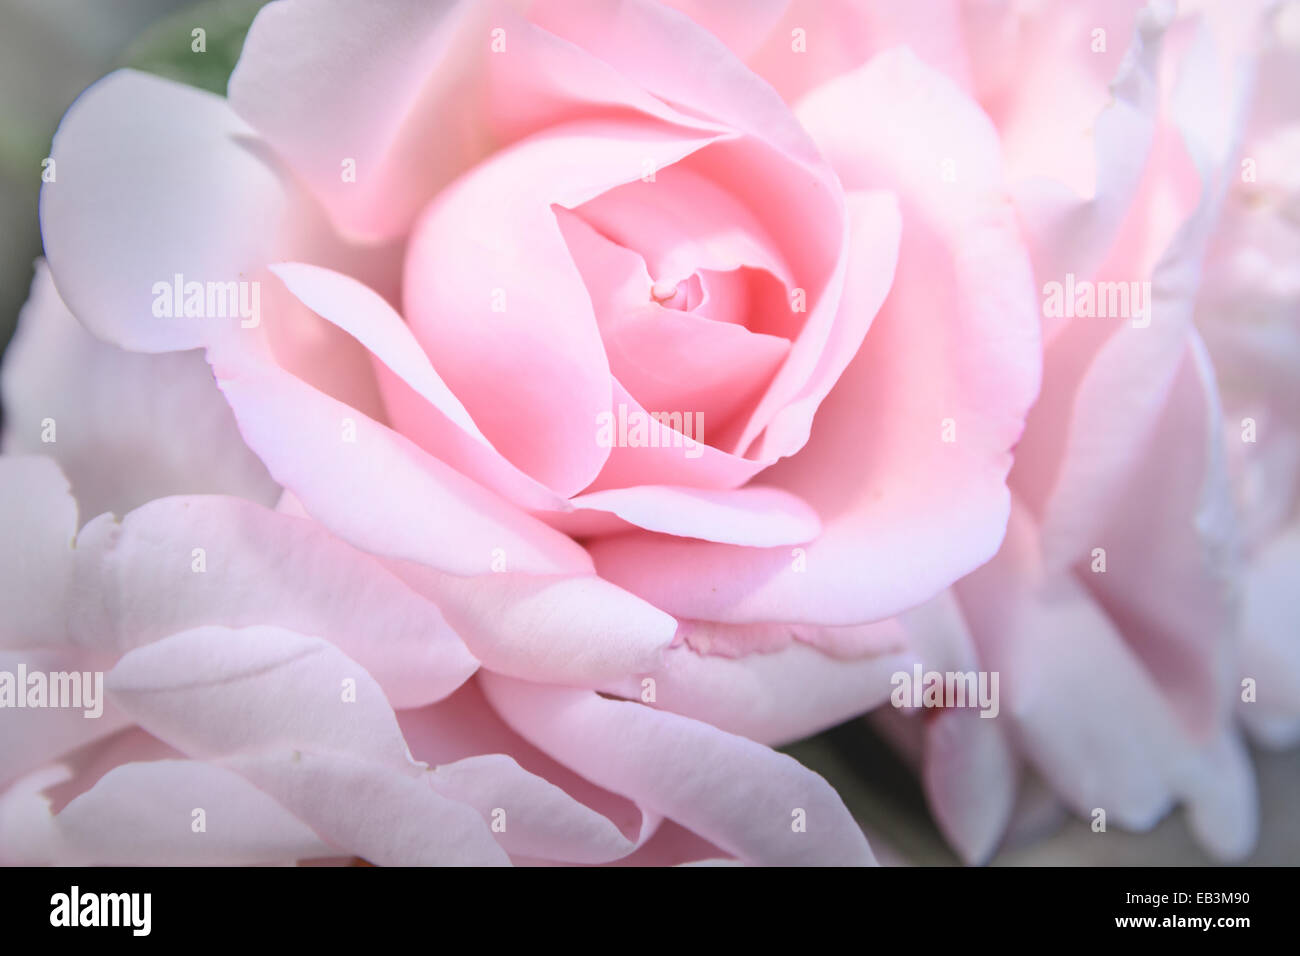 Pink silky soft rose close-up Stock Photo